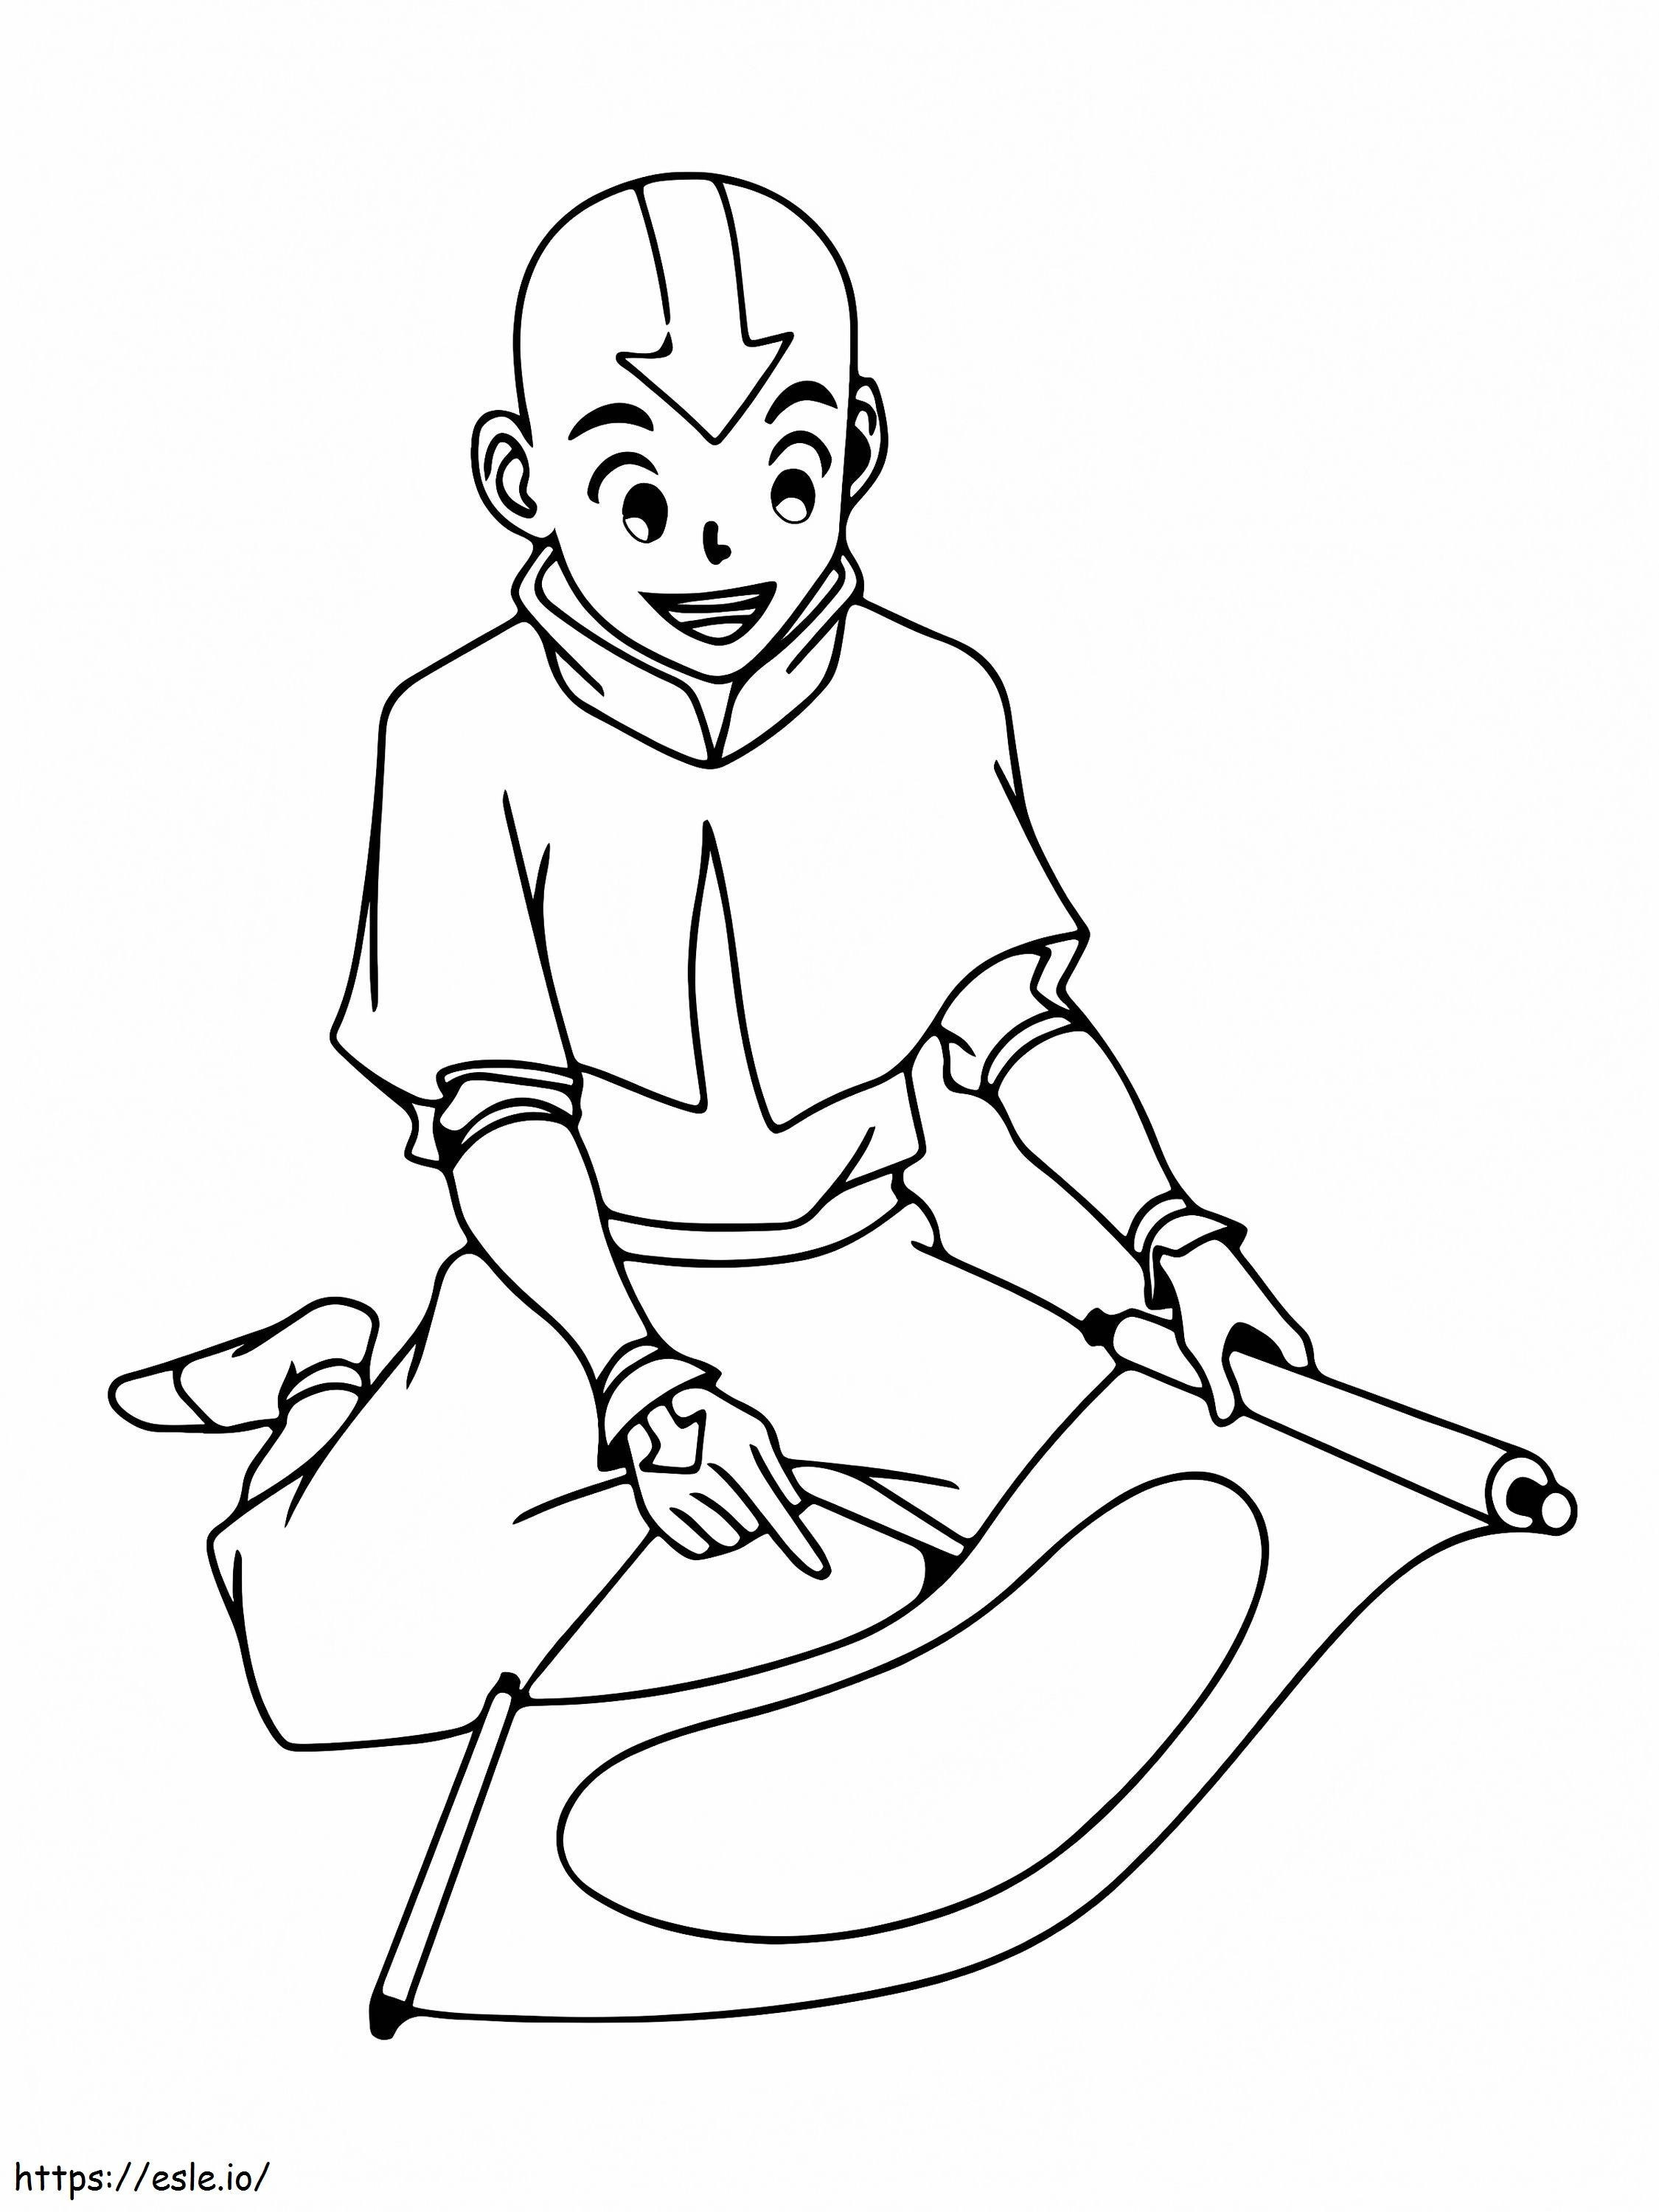 Happy Aang The Legend Of Korra coloring page